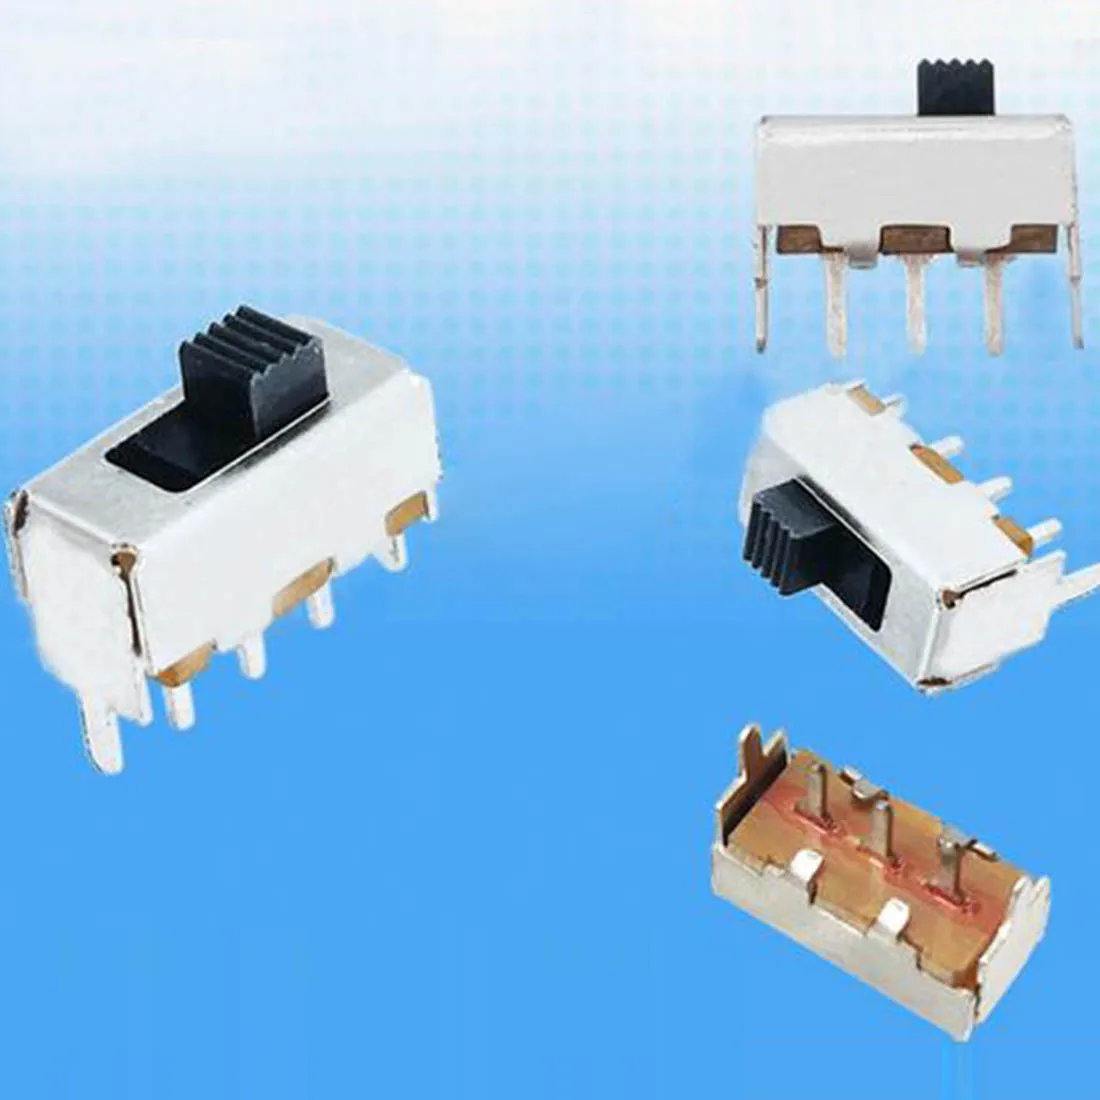 

10pcs SS-12F44 Slide Switch 5 Pins Switches 2 Positions Mounting Electronic Button Mini On-off Key Wholesale Price